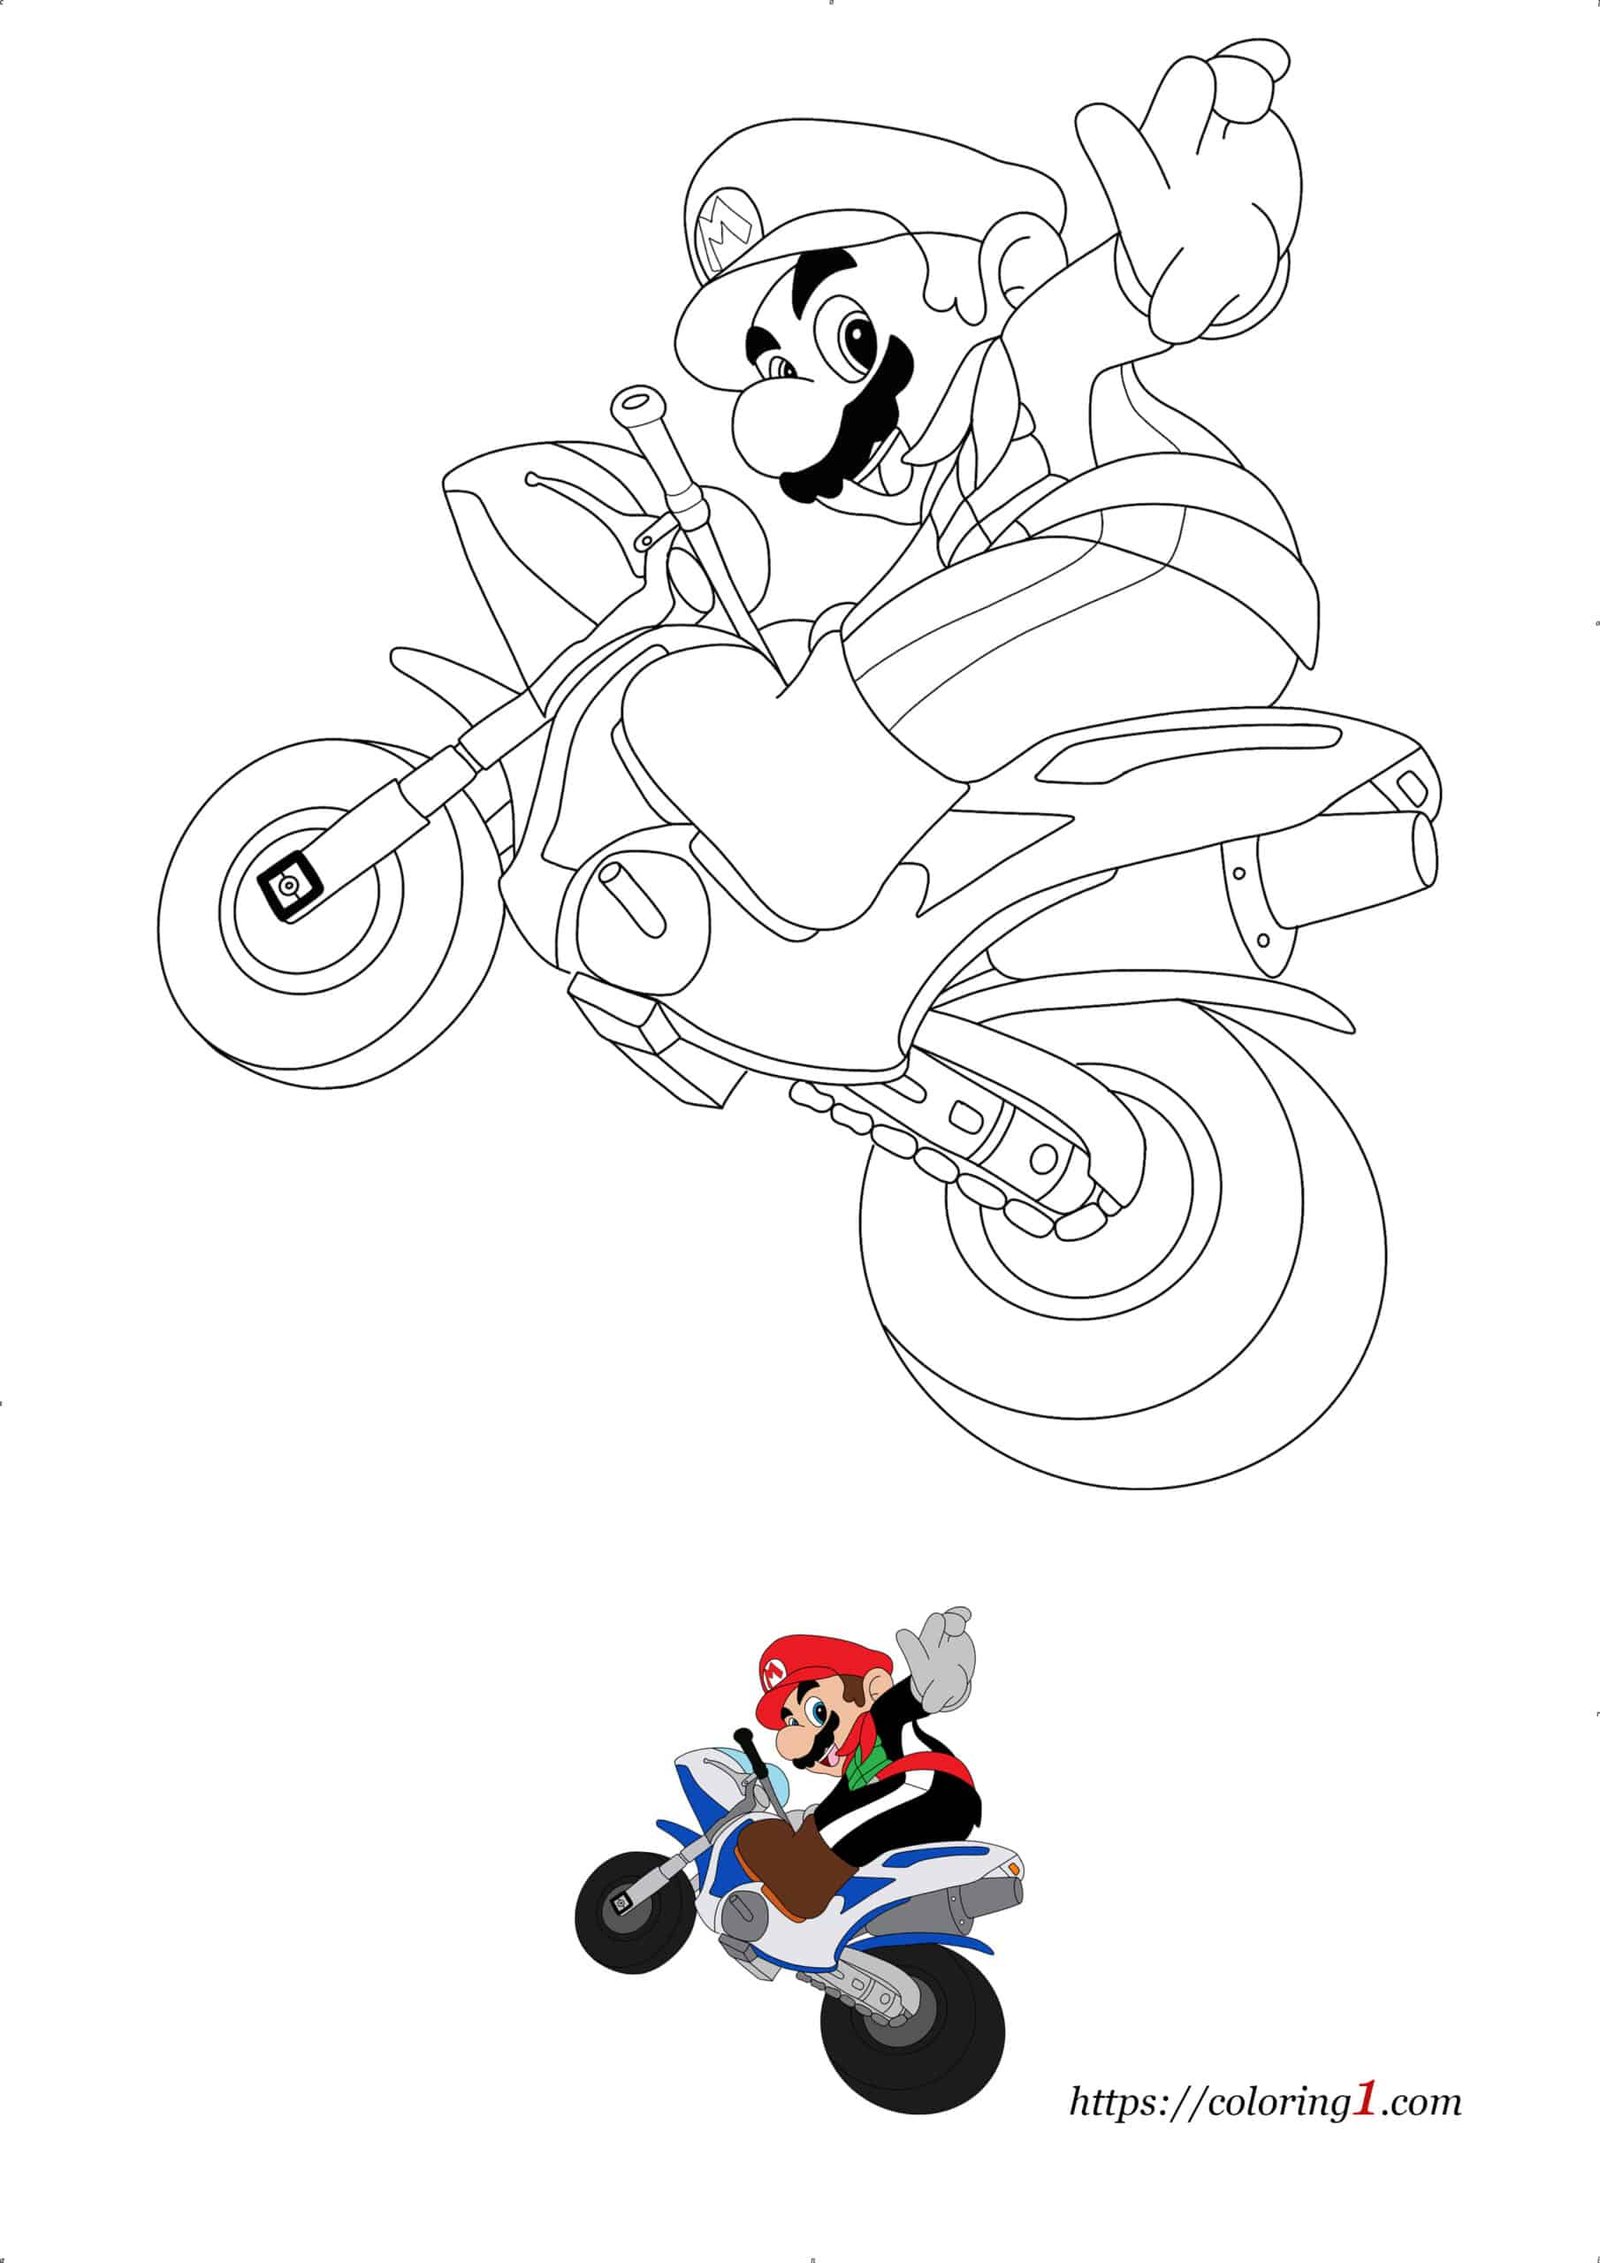 Mario driving with Motorcycle coloring page to print